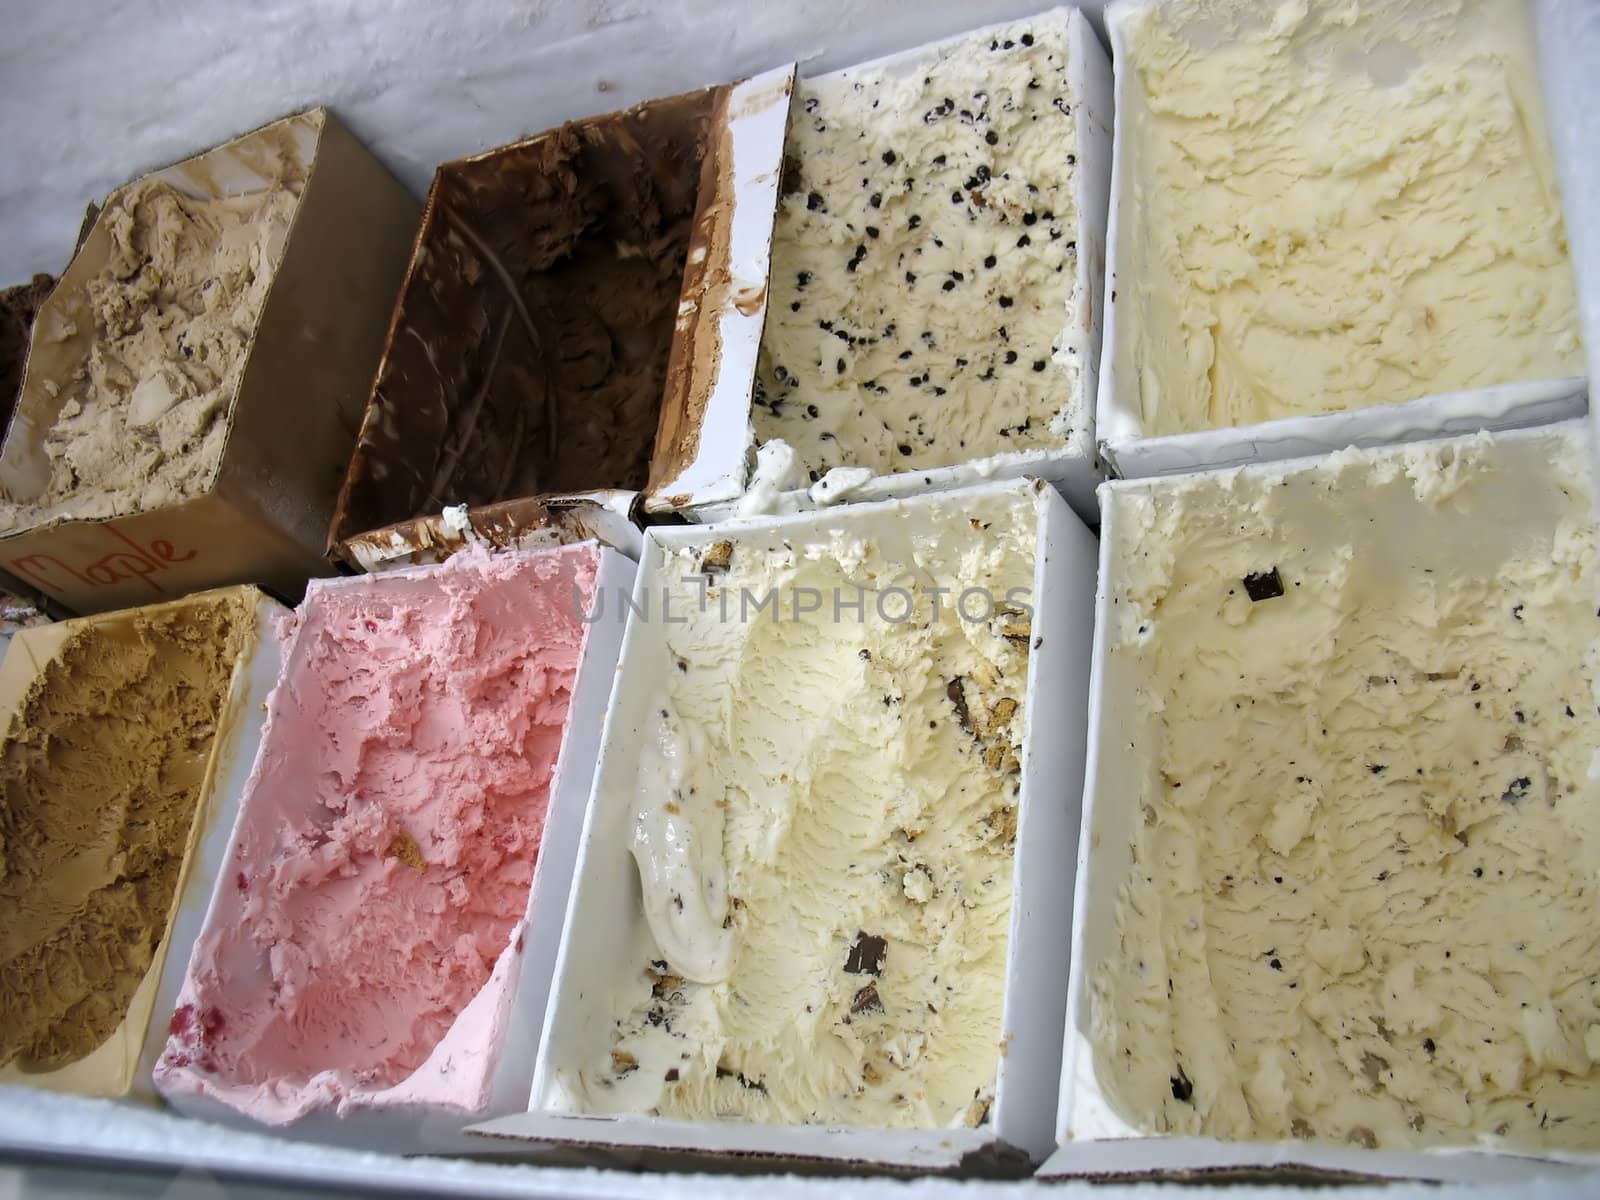 ICE CREAM - So many flavors - how do you pick just one?